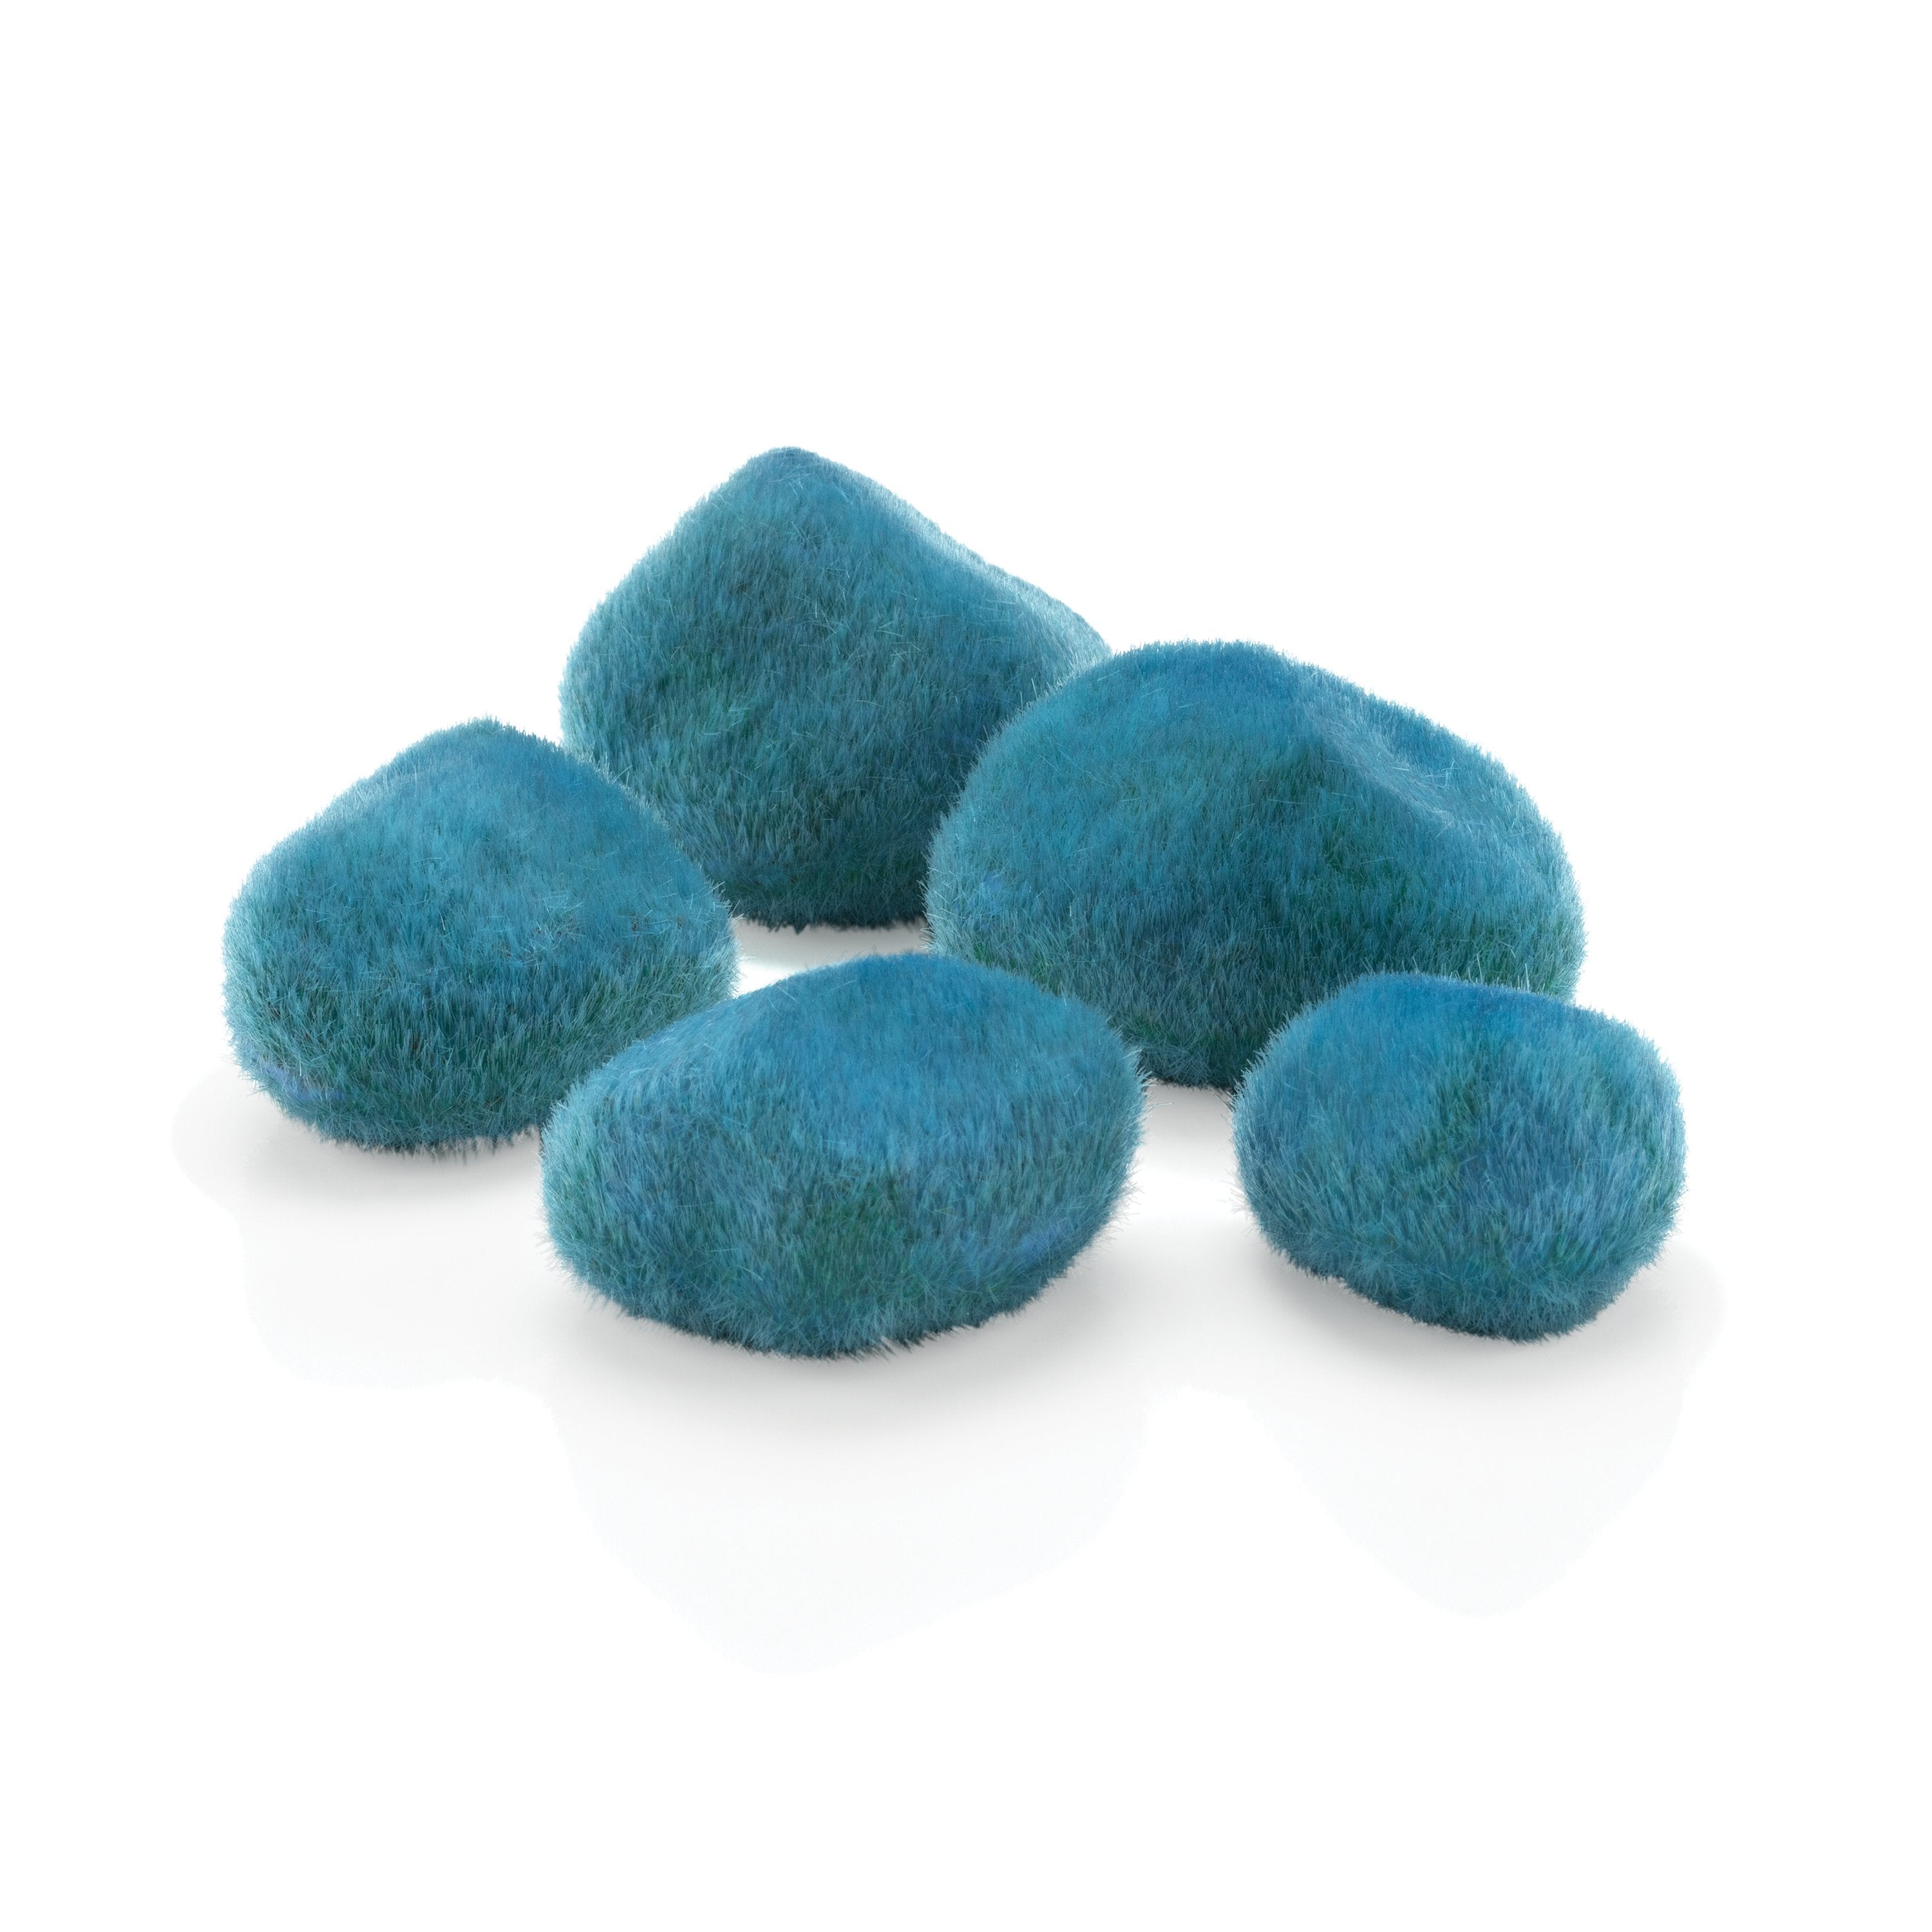 Moss Pebbles Set available in Blue